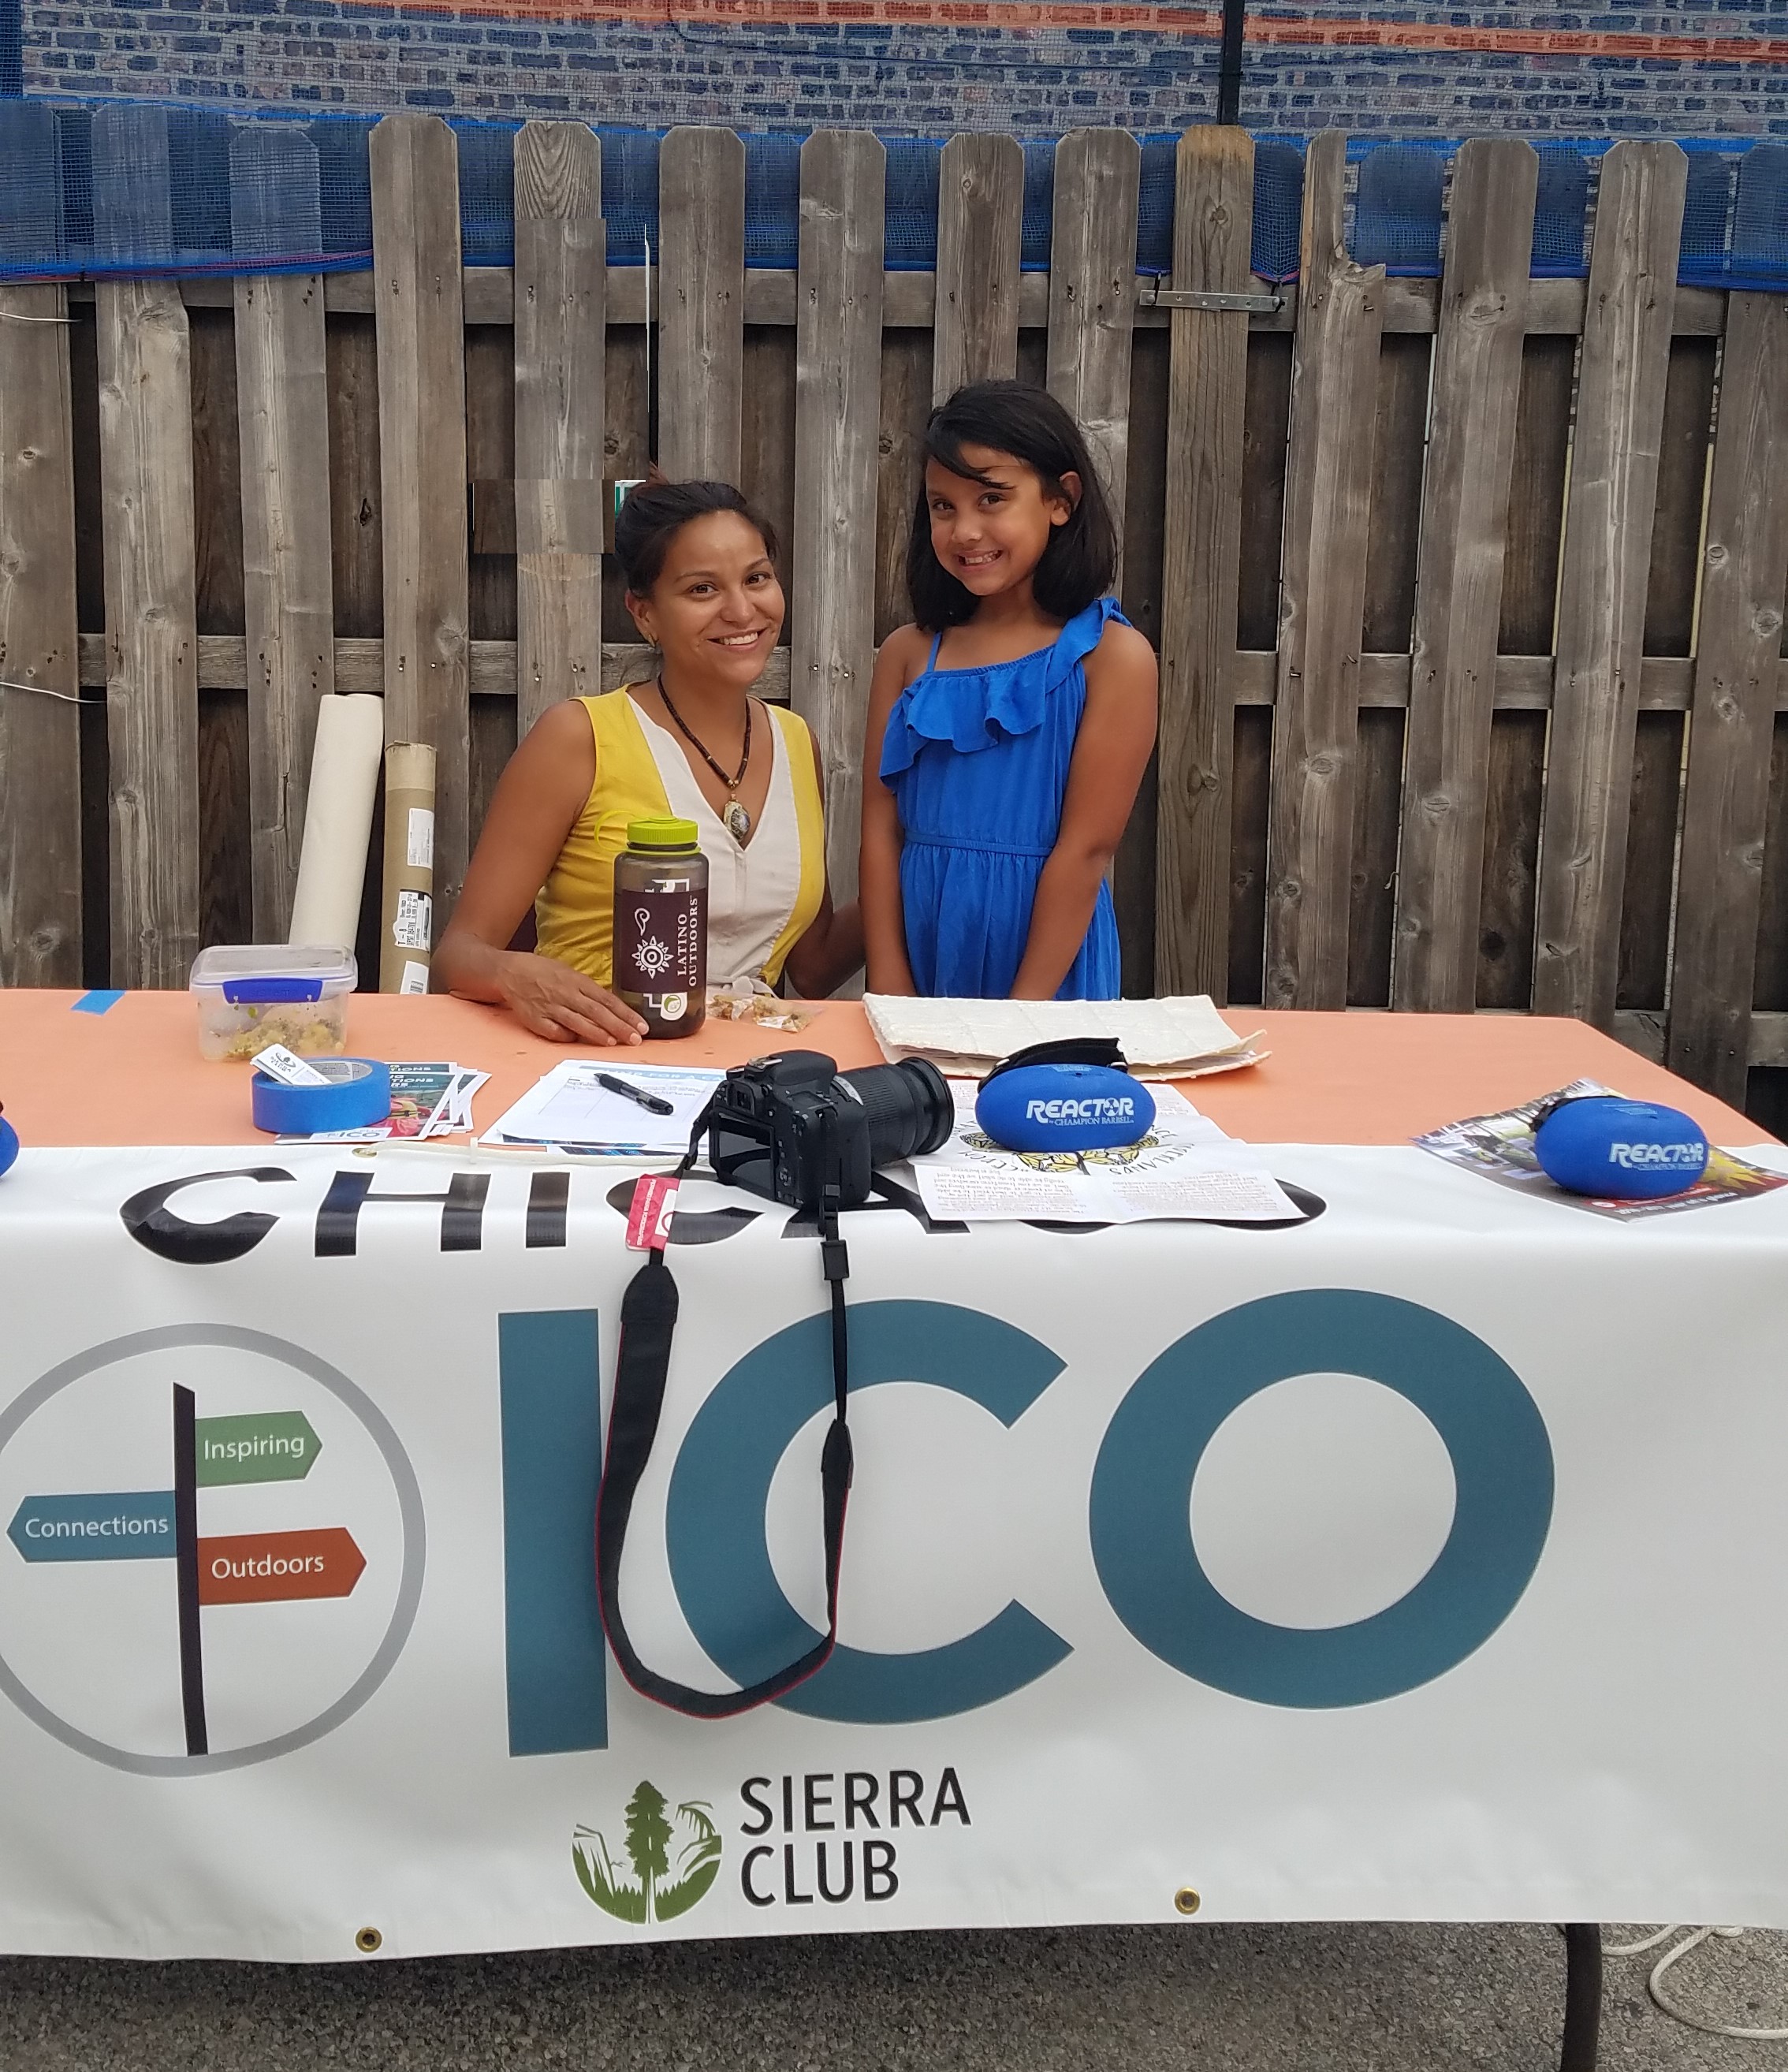 Katty Regalado and an ICO participant smile while promoting Chicago ICO.